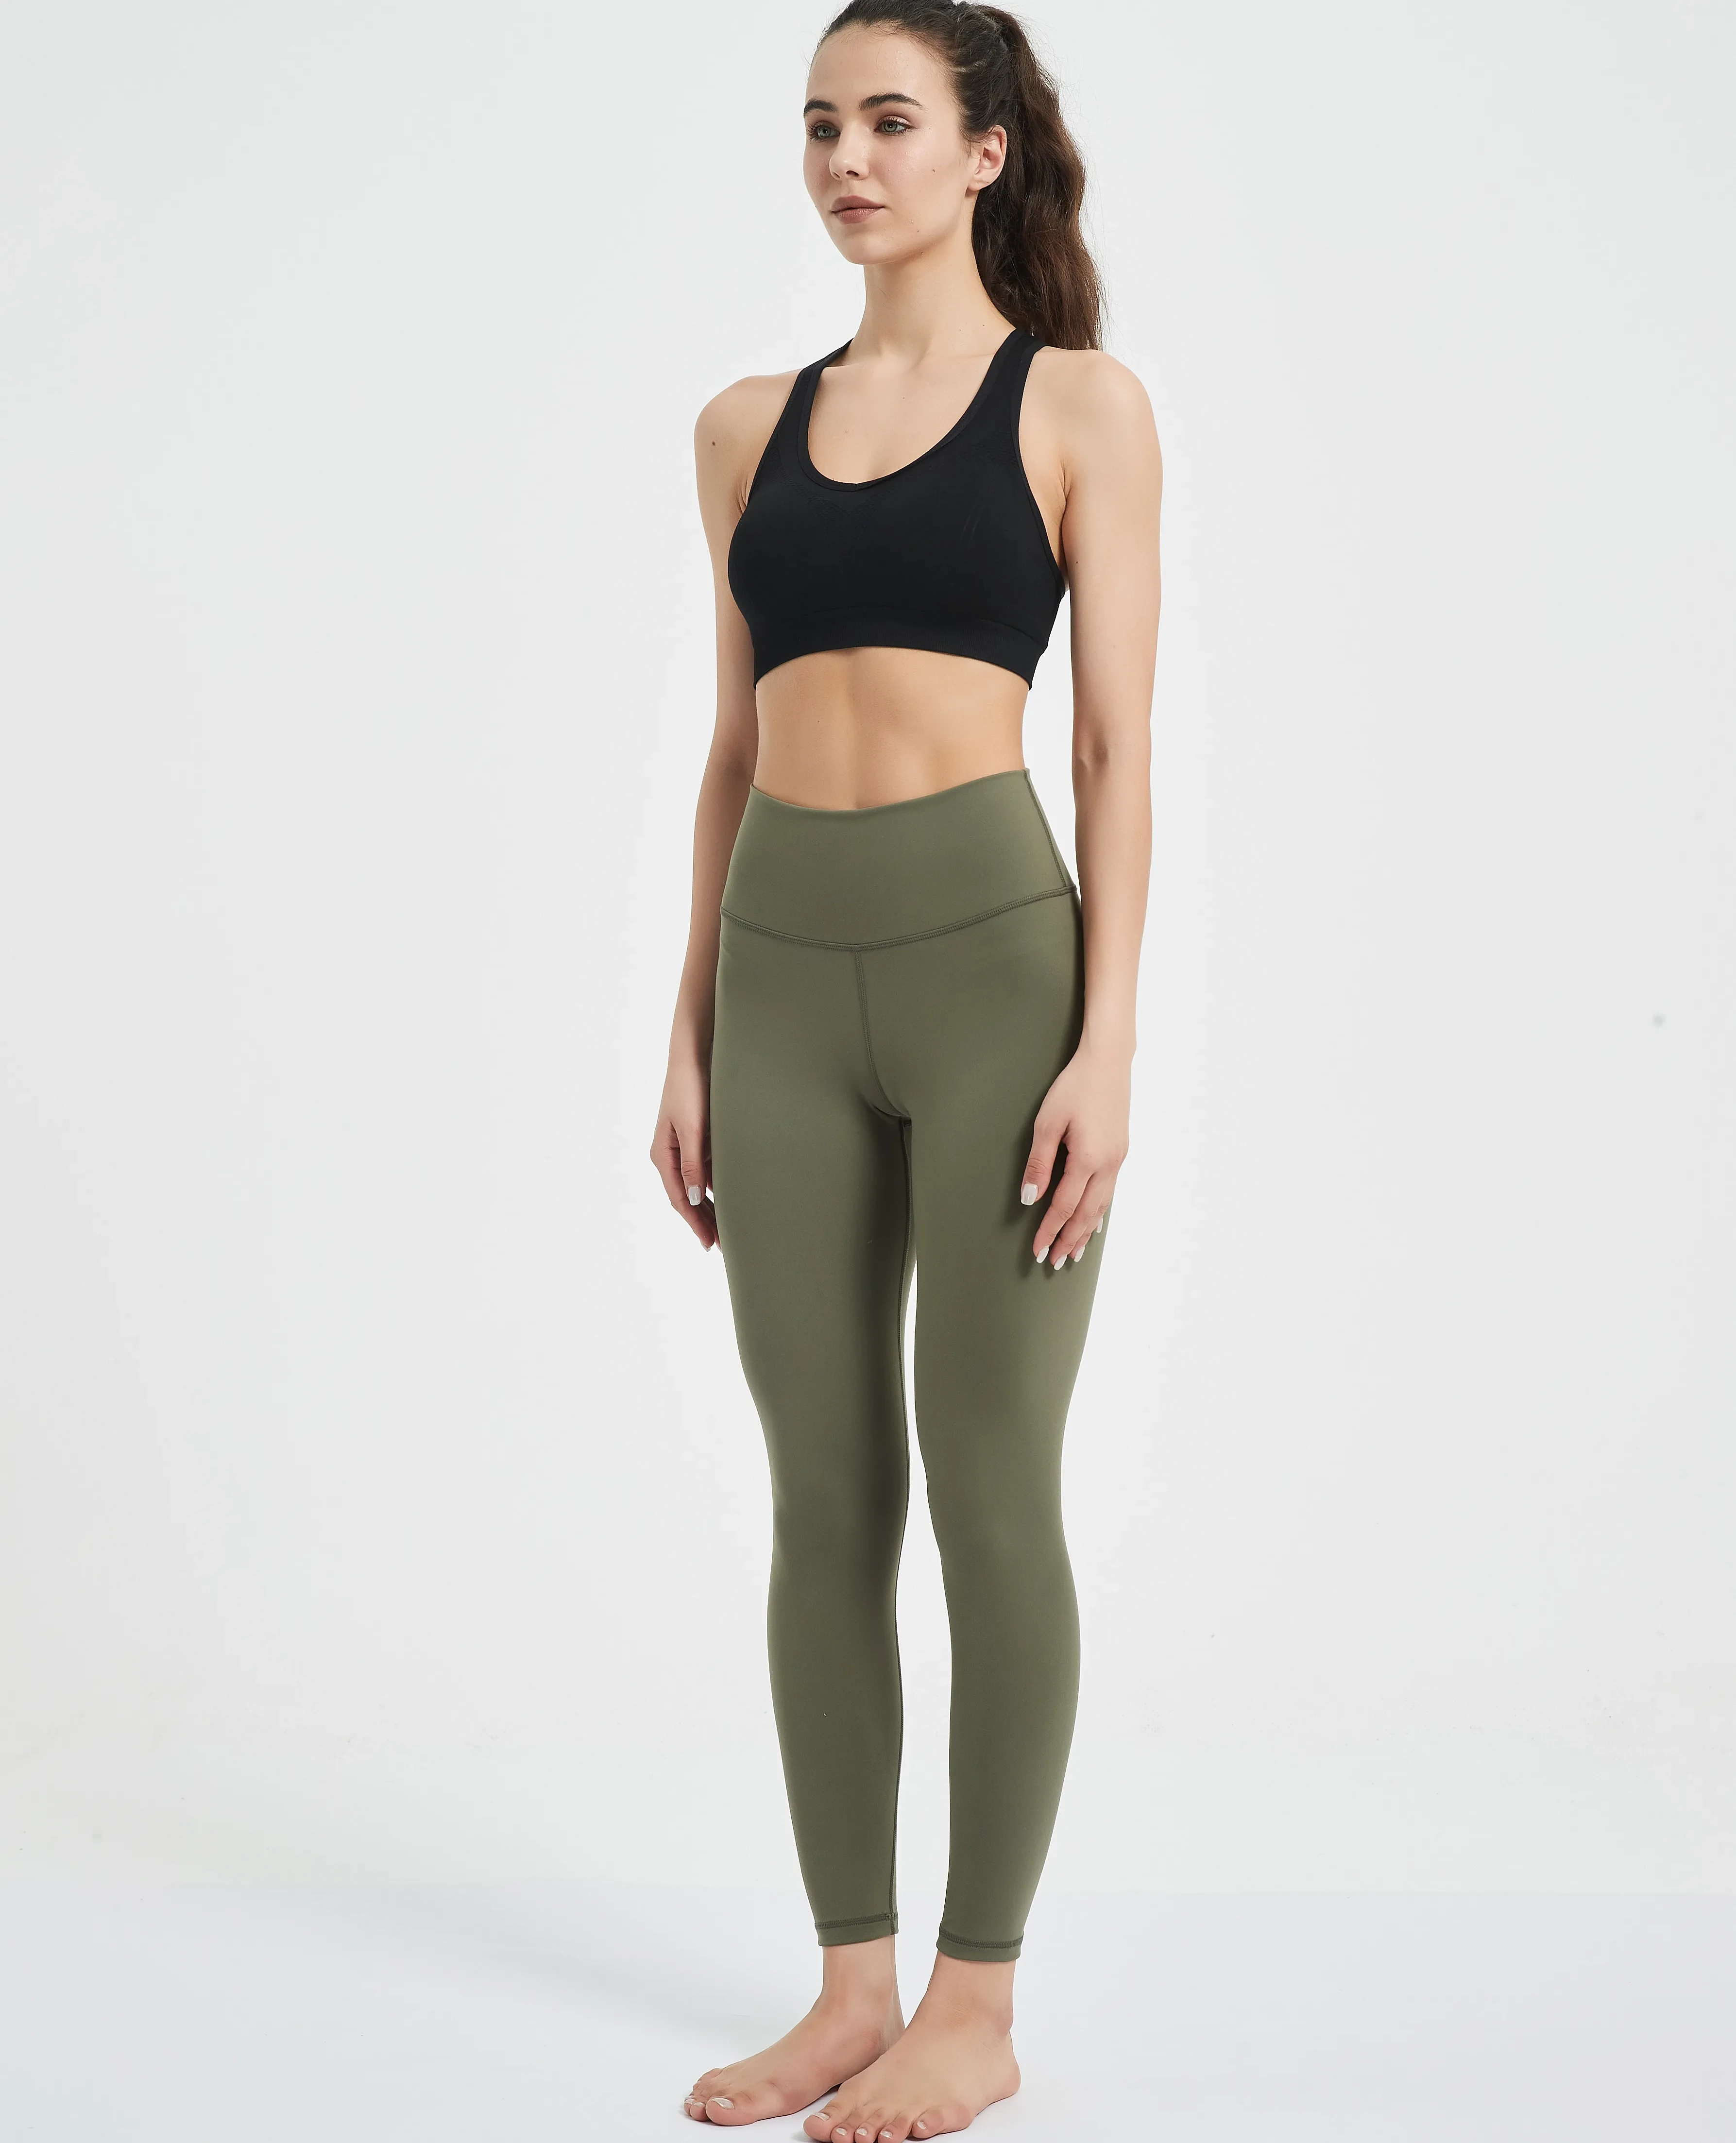 Kaavia Activewear - Leggings that aren't see through are